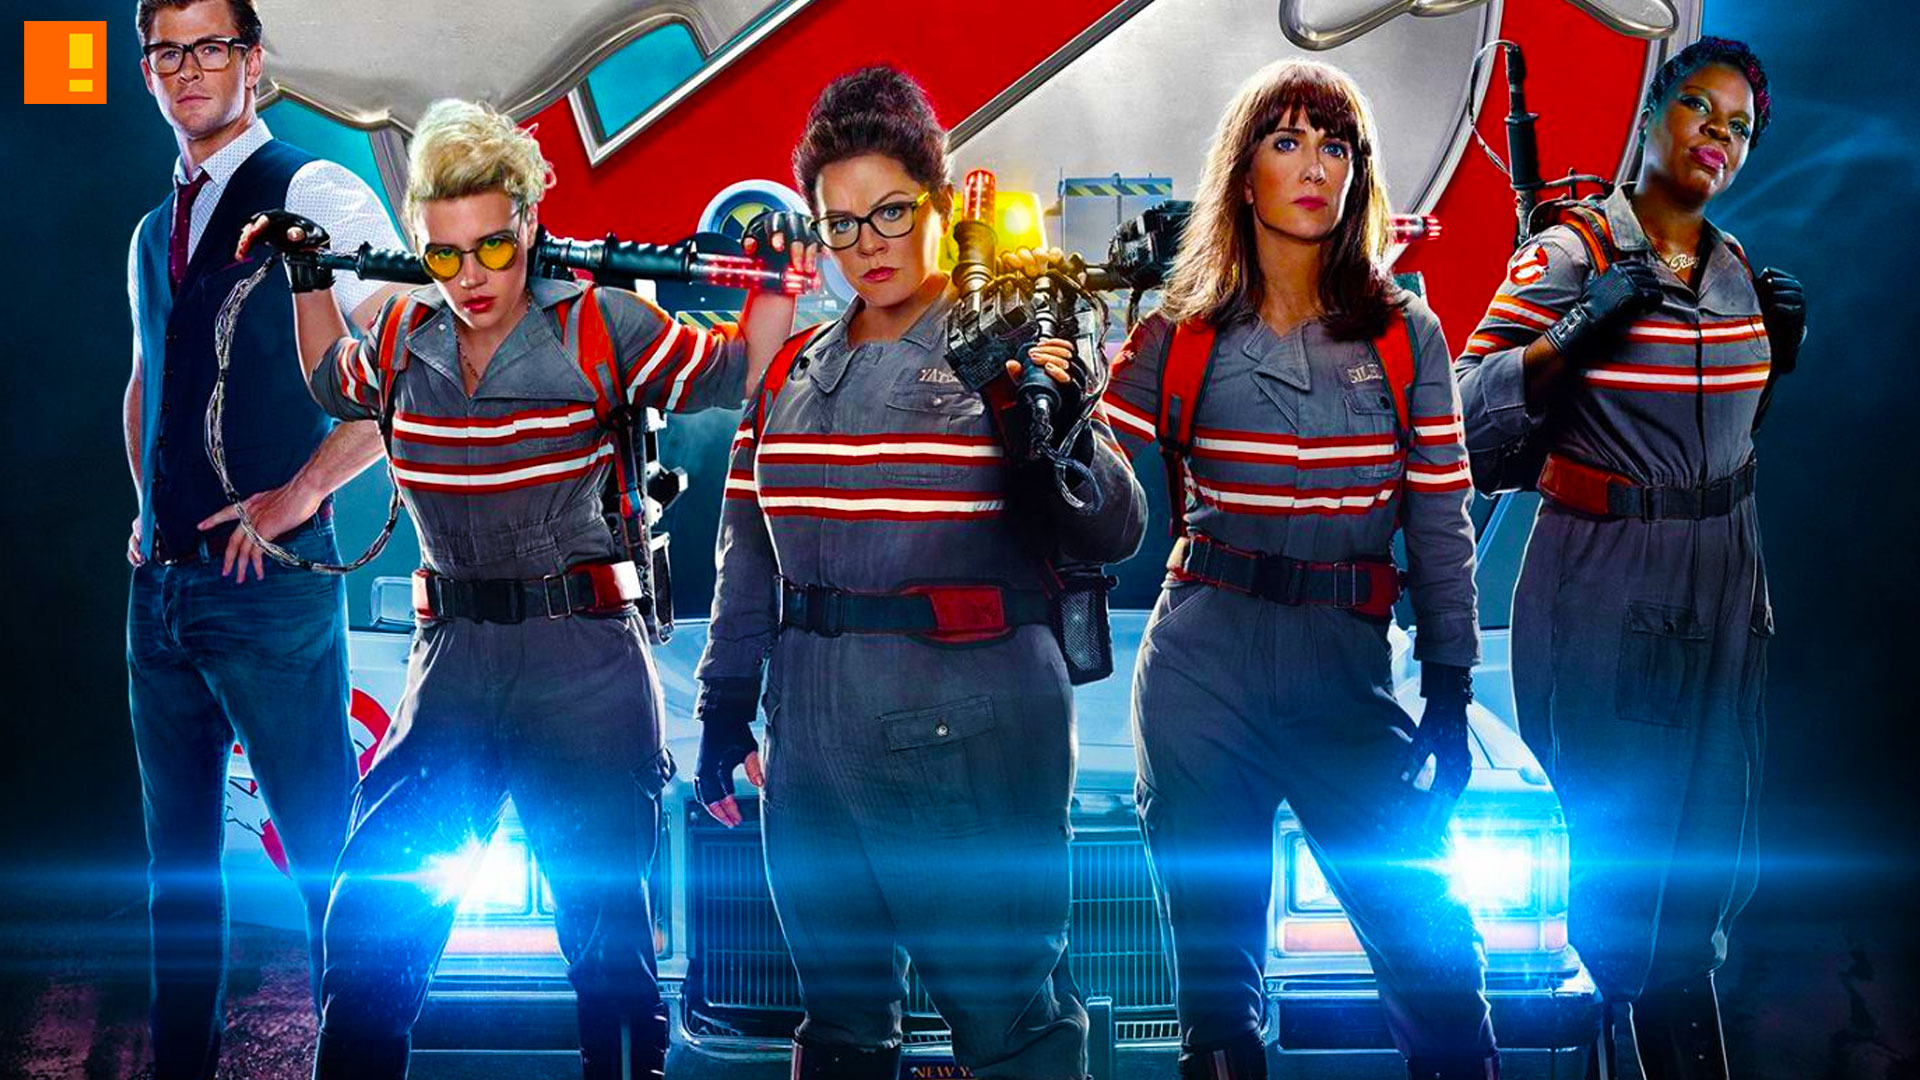 ghostbusters original cast in new movie